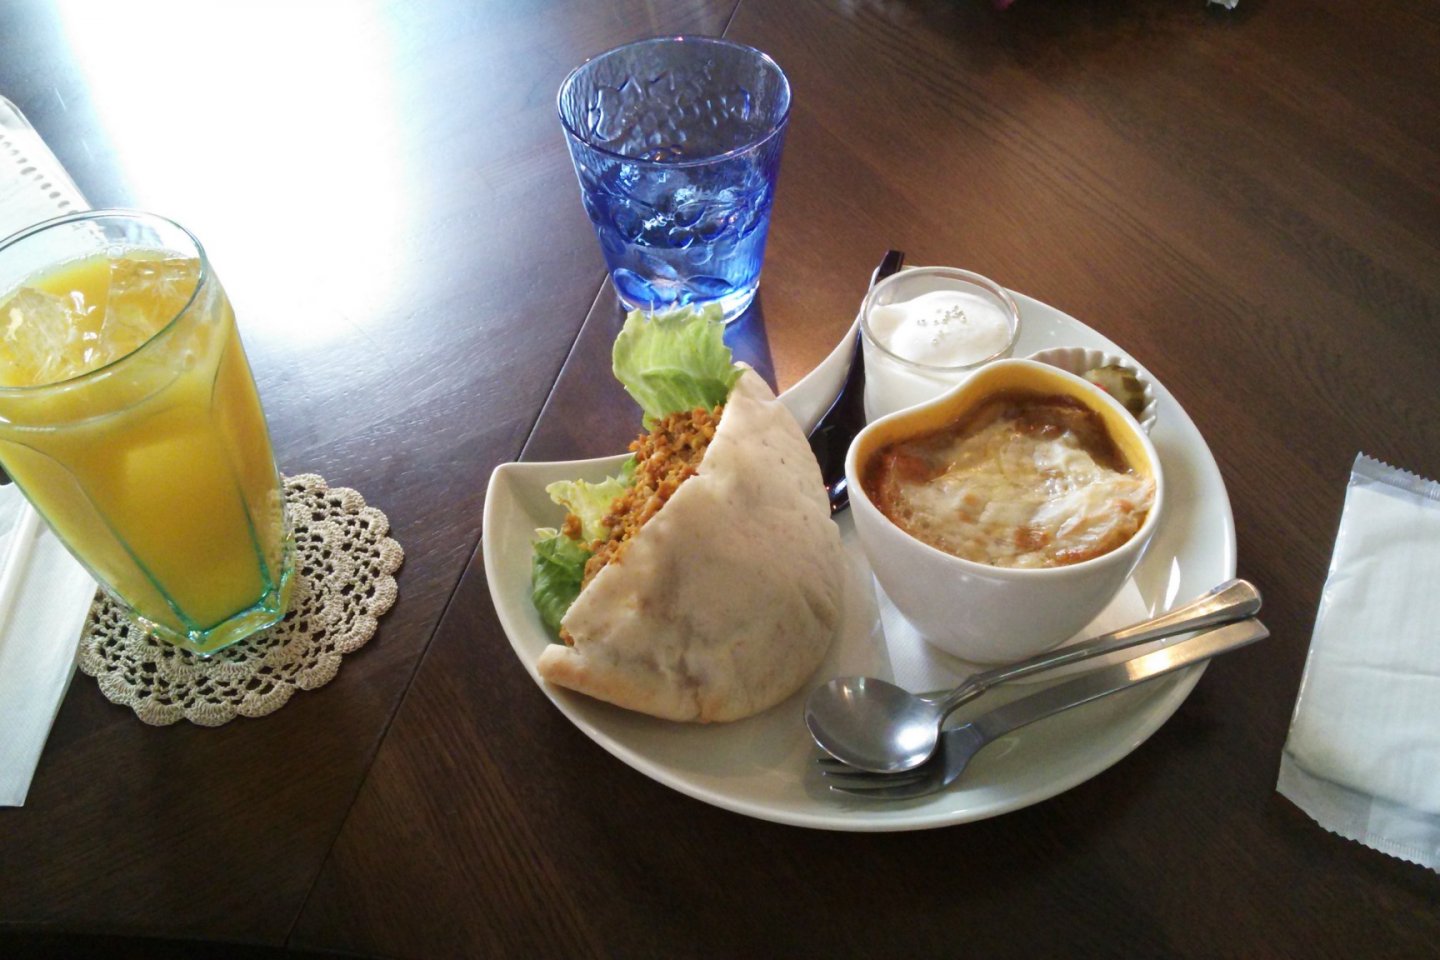 The delicious "Palette" lunch set - a pita bread filled with dry curry and lettuce, onion soup gratin, blancmange and a drink